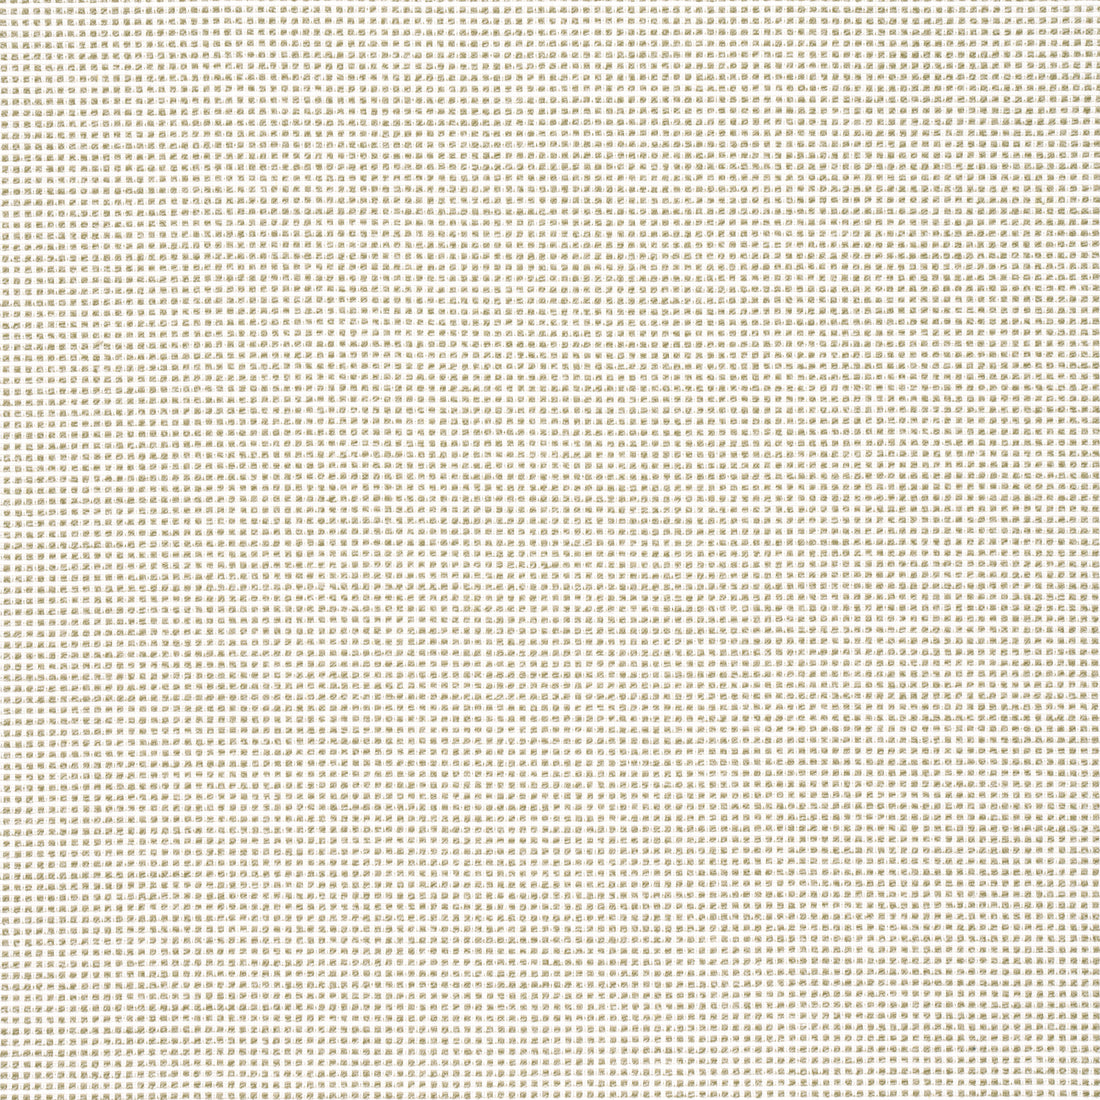 Stella fabric in stone color - pattern number W77115 - by Thibaut in the Veneto collection